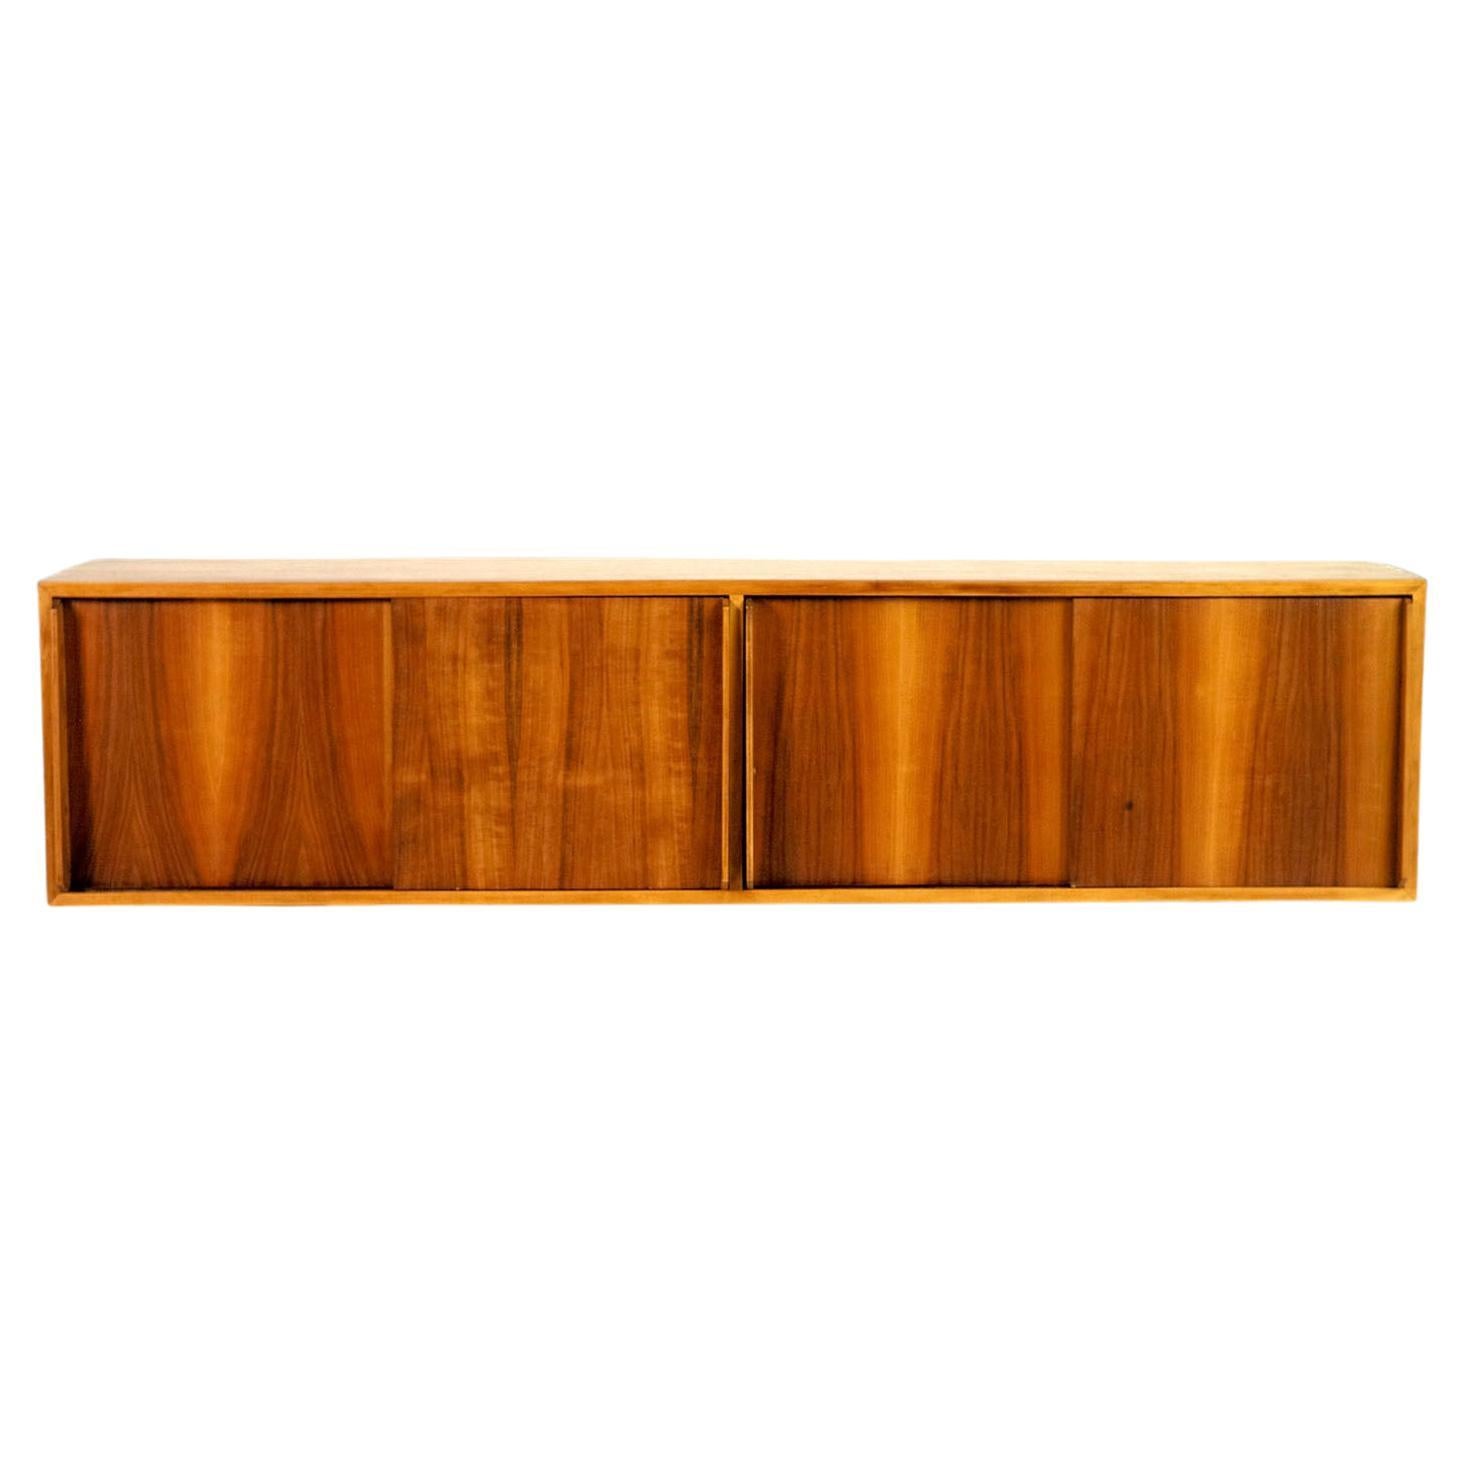 Hanging sideboard in flamed walnut, Italy 1955